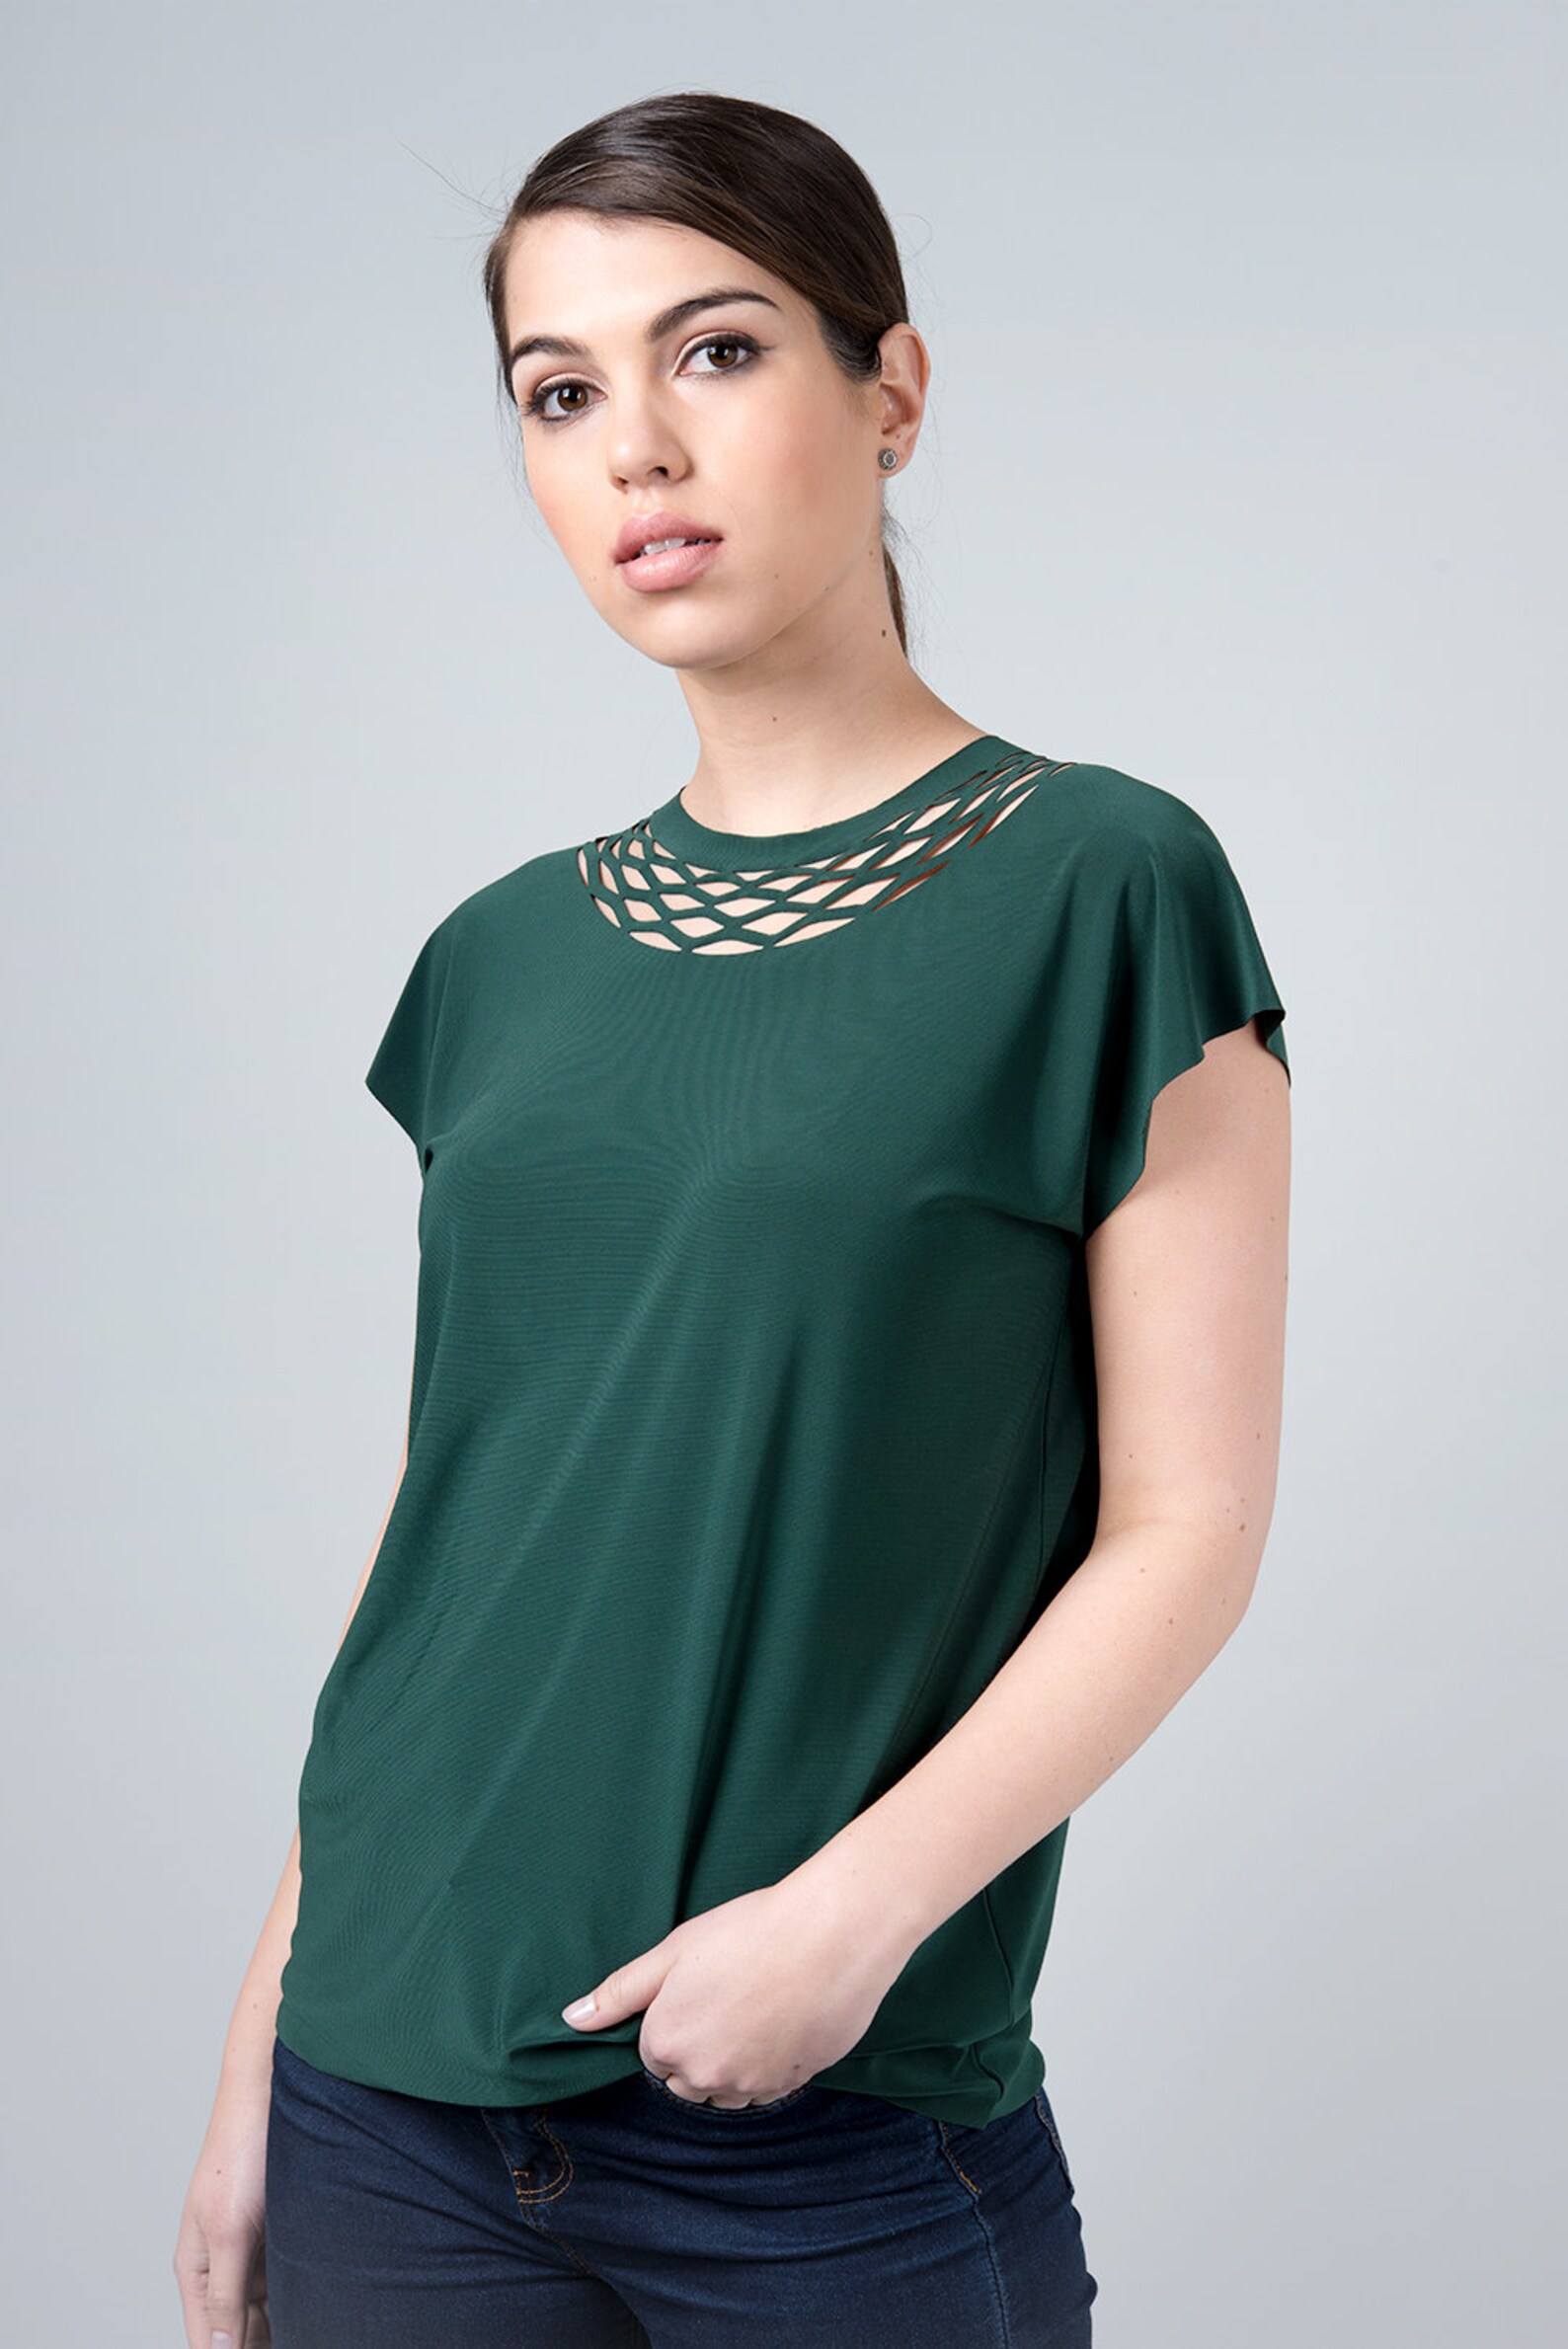 Green Top Summer Top Green Blouse Casual Top Green Womens - Etsy